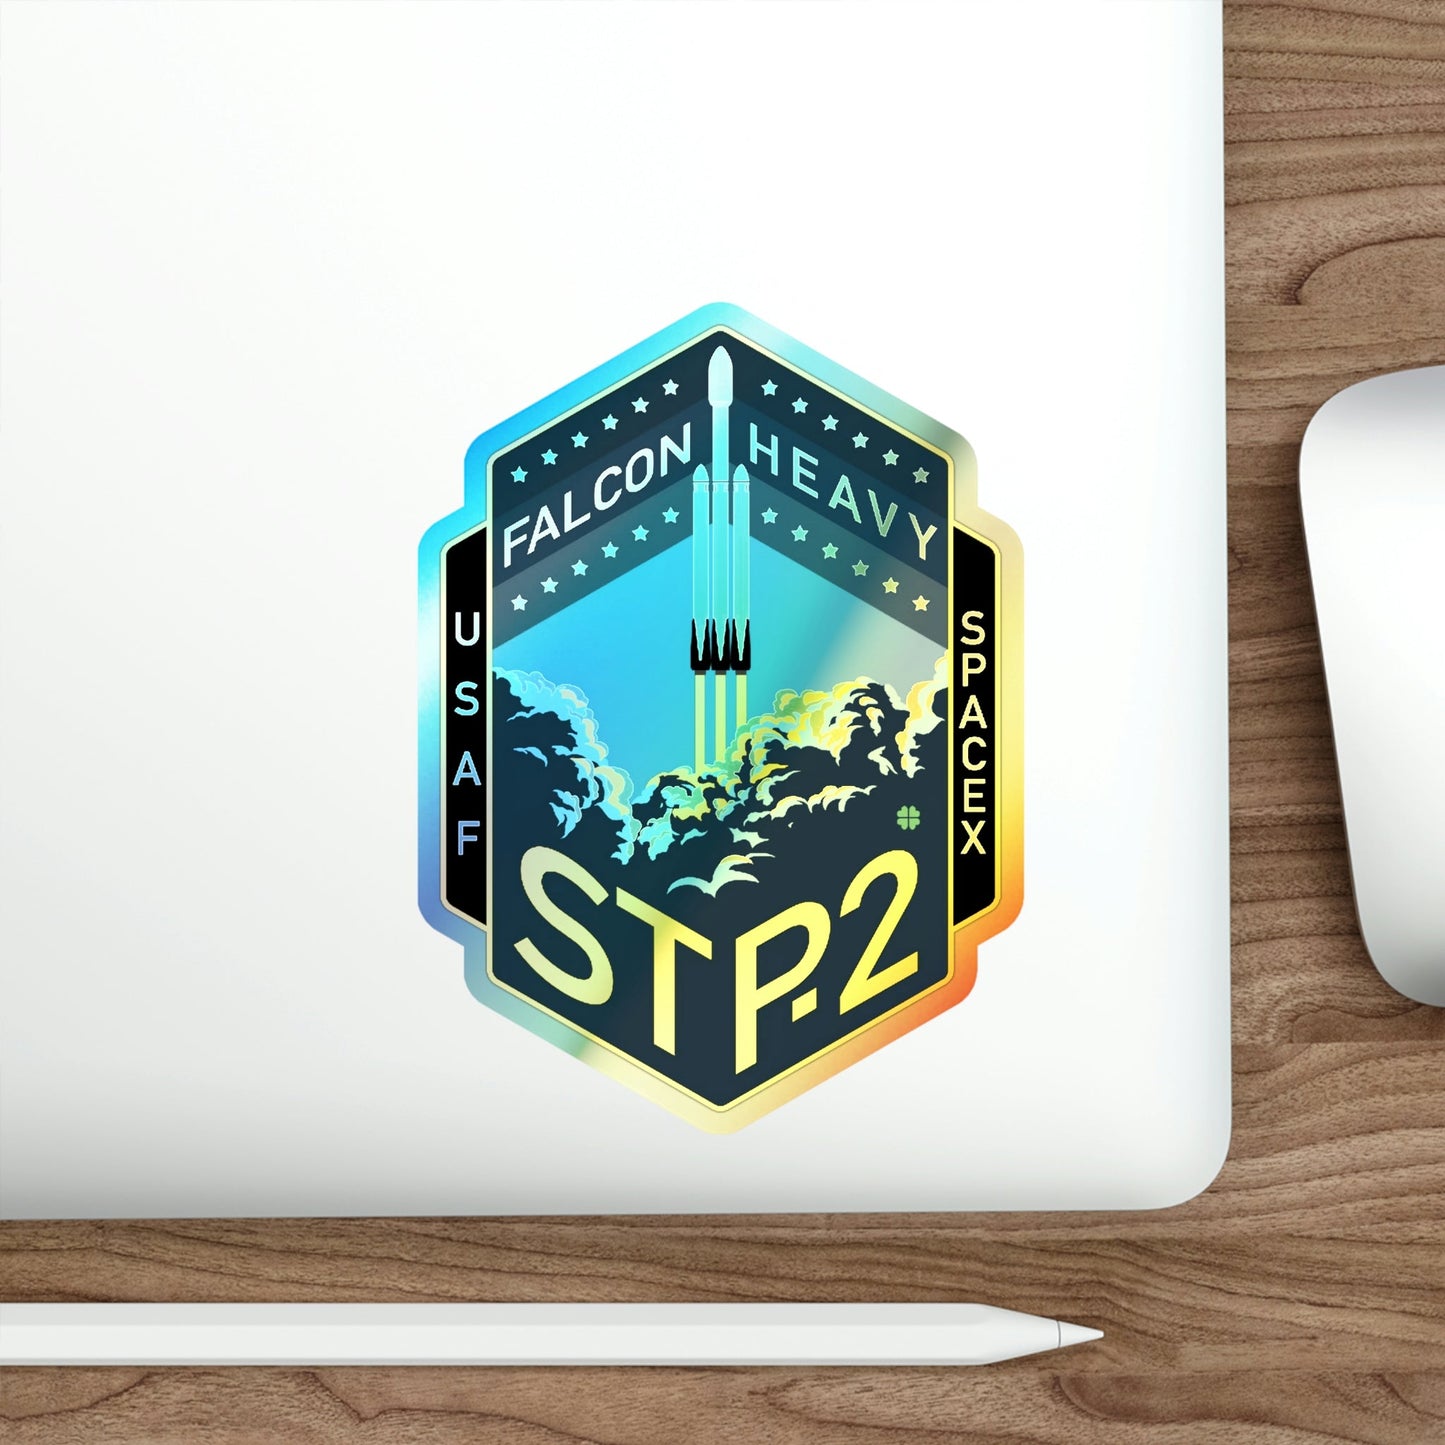 STP-2 (SpaceX) Holographic STICKER Die-Cut Vinyl Decal-The Sticker Space